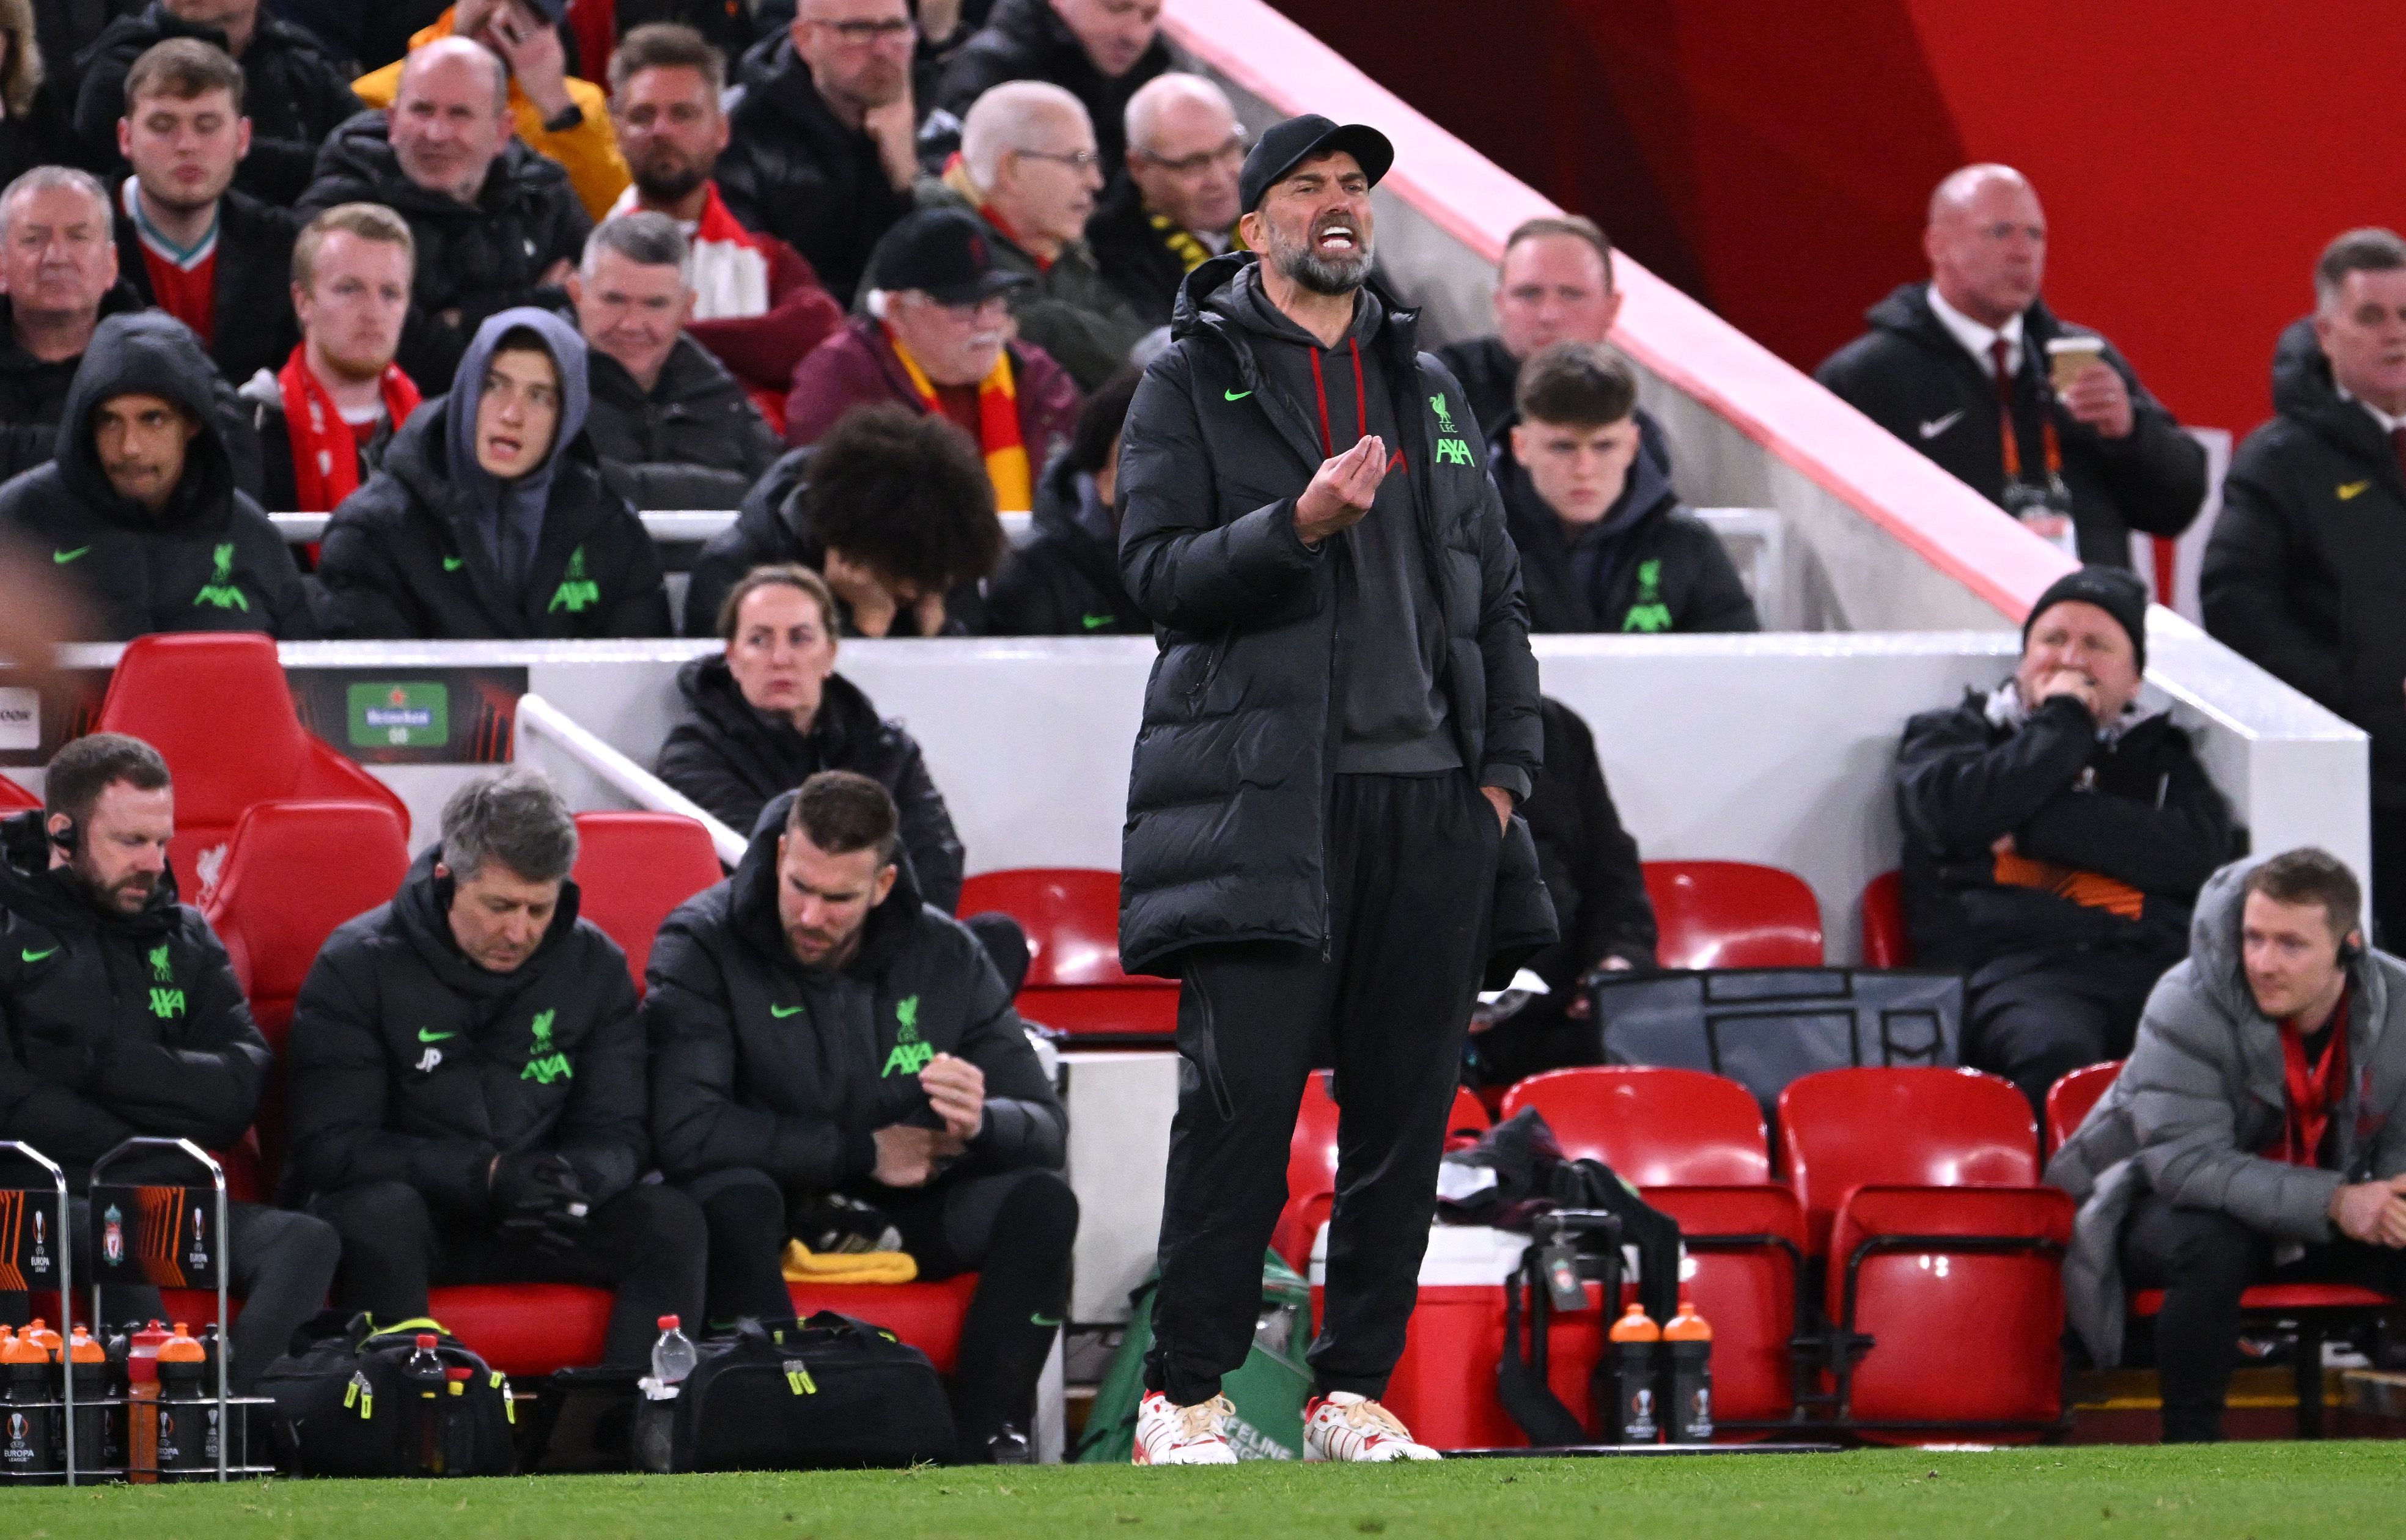 “It’s what they always do” – Fabrizio Romano discusses where it all went wrong for Klopp and Liverpool against Atalanta